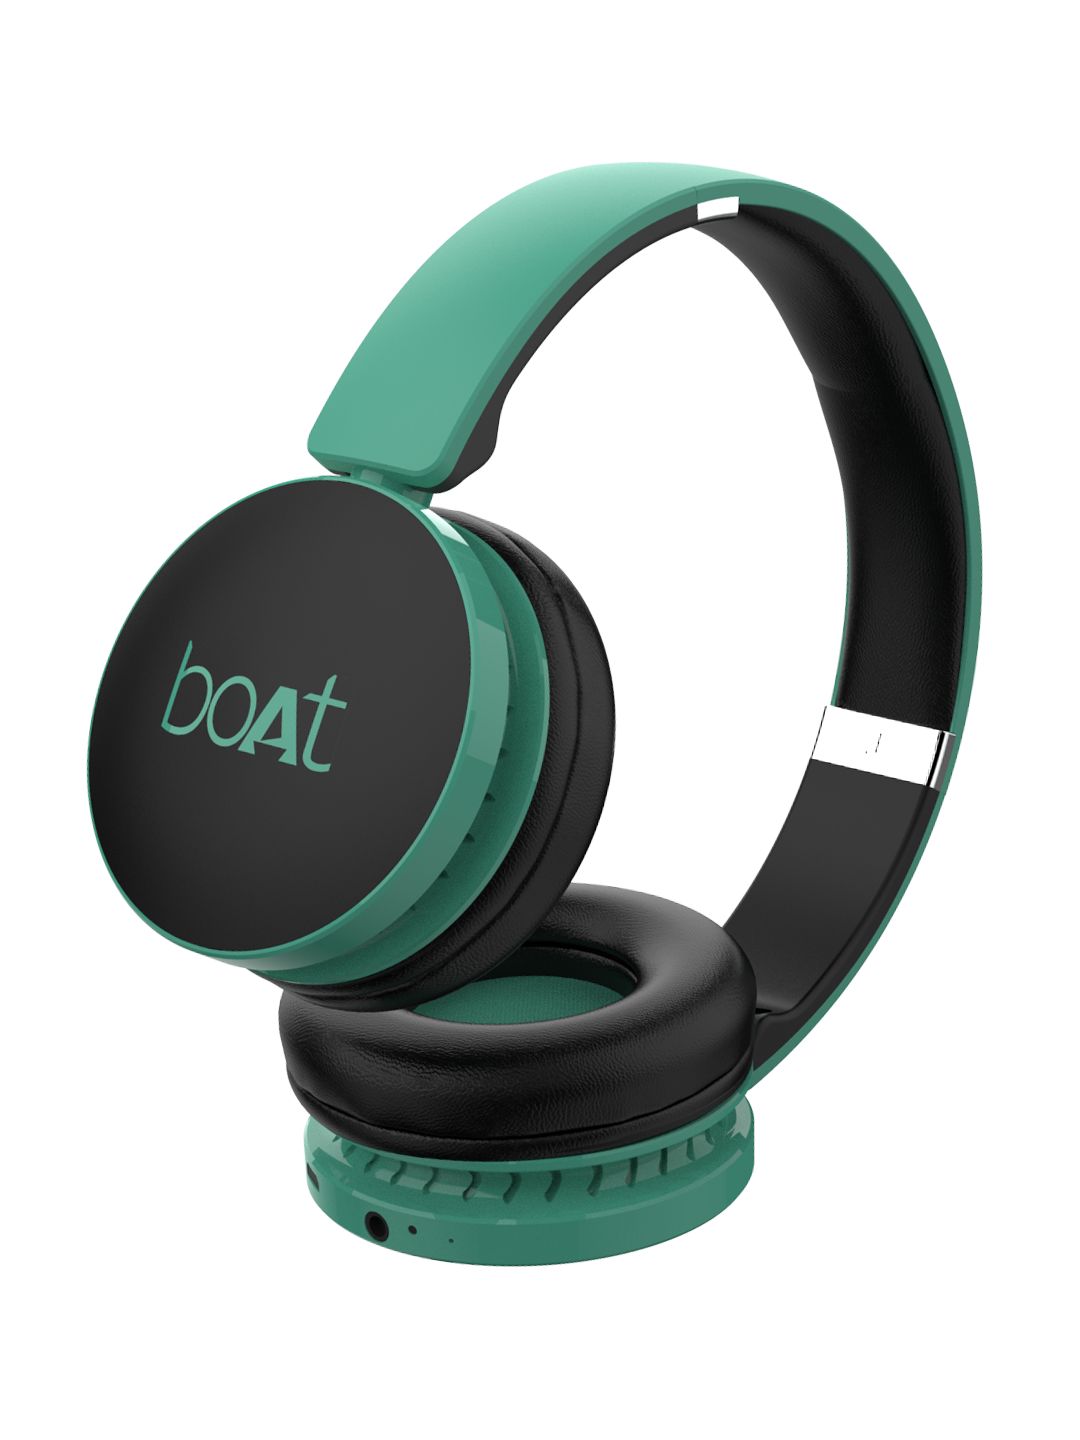 boAt Rockerz 370 Gregarious Green Wireless Headphone with Immersive Audio Soft Earcups Price in India